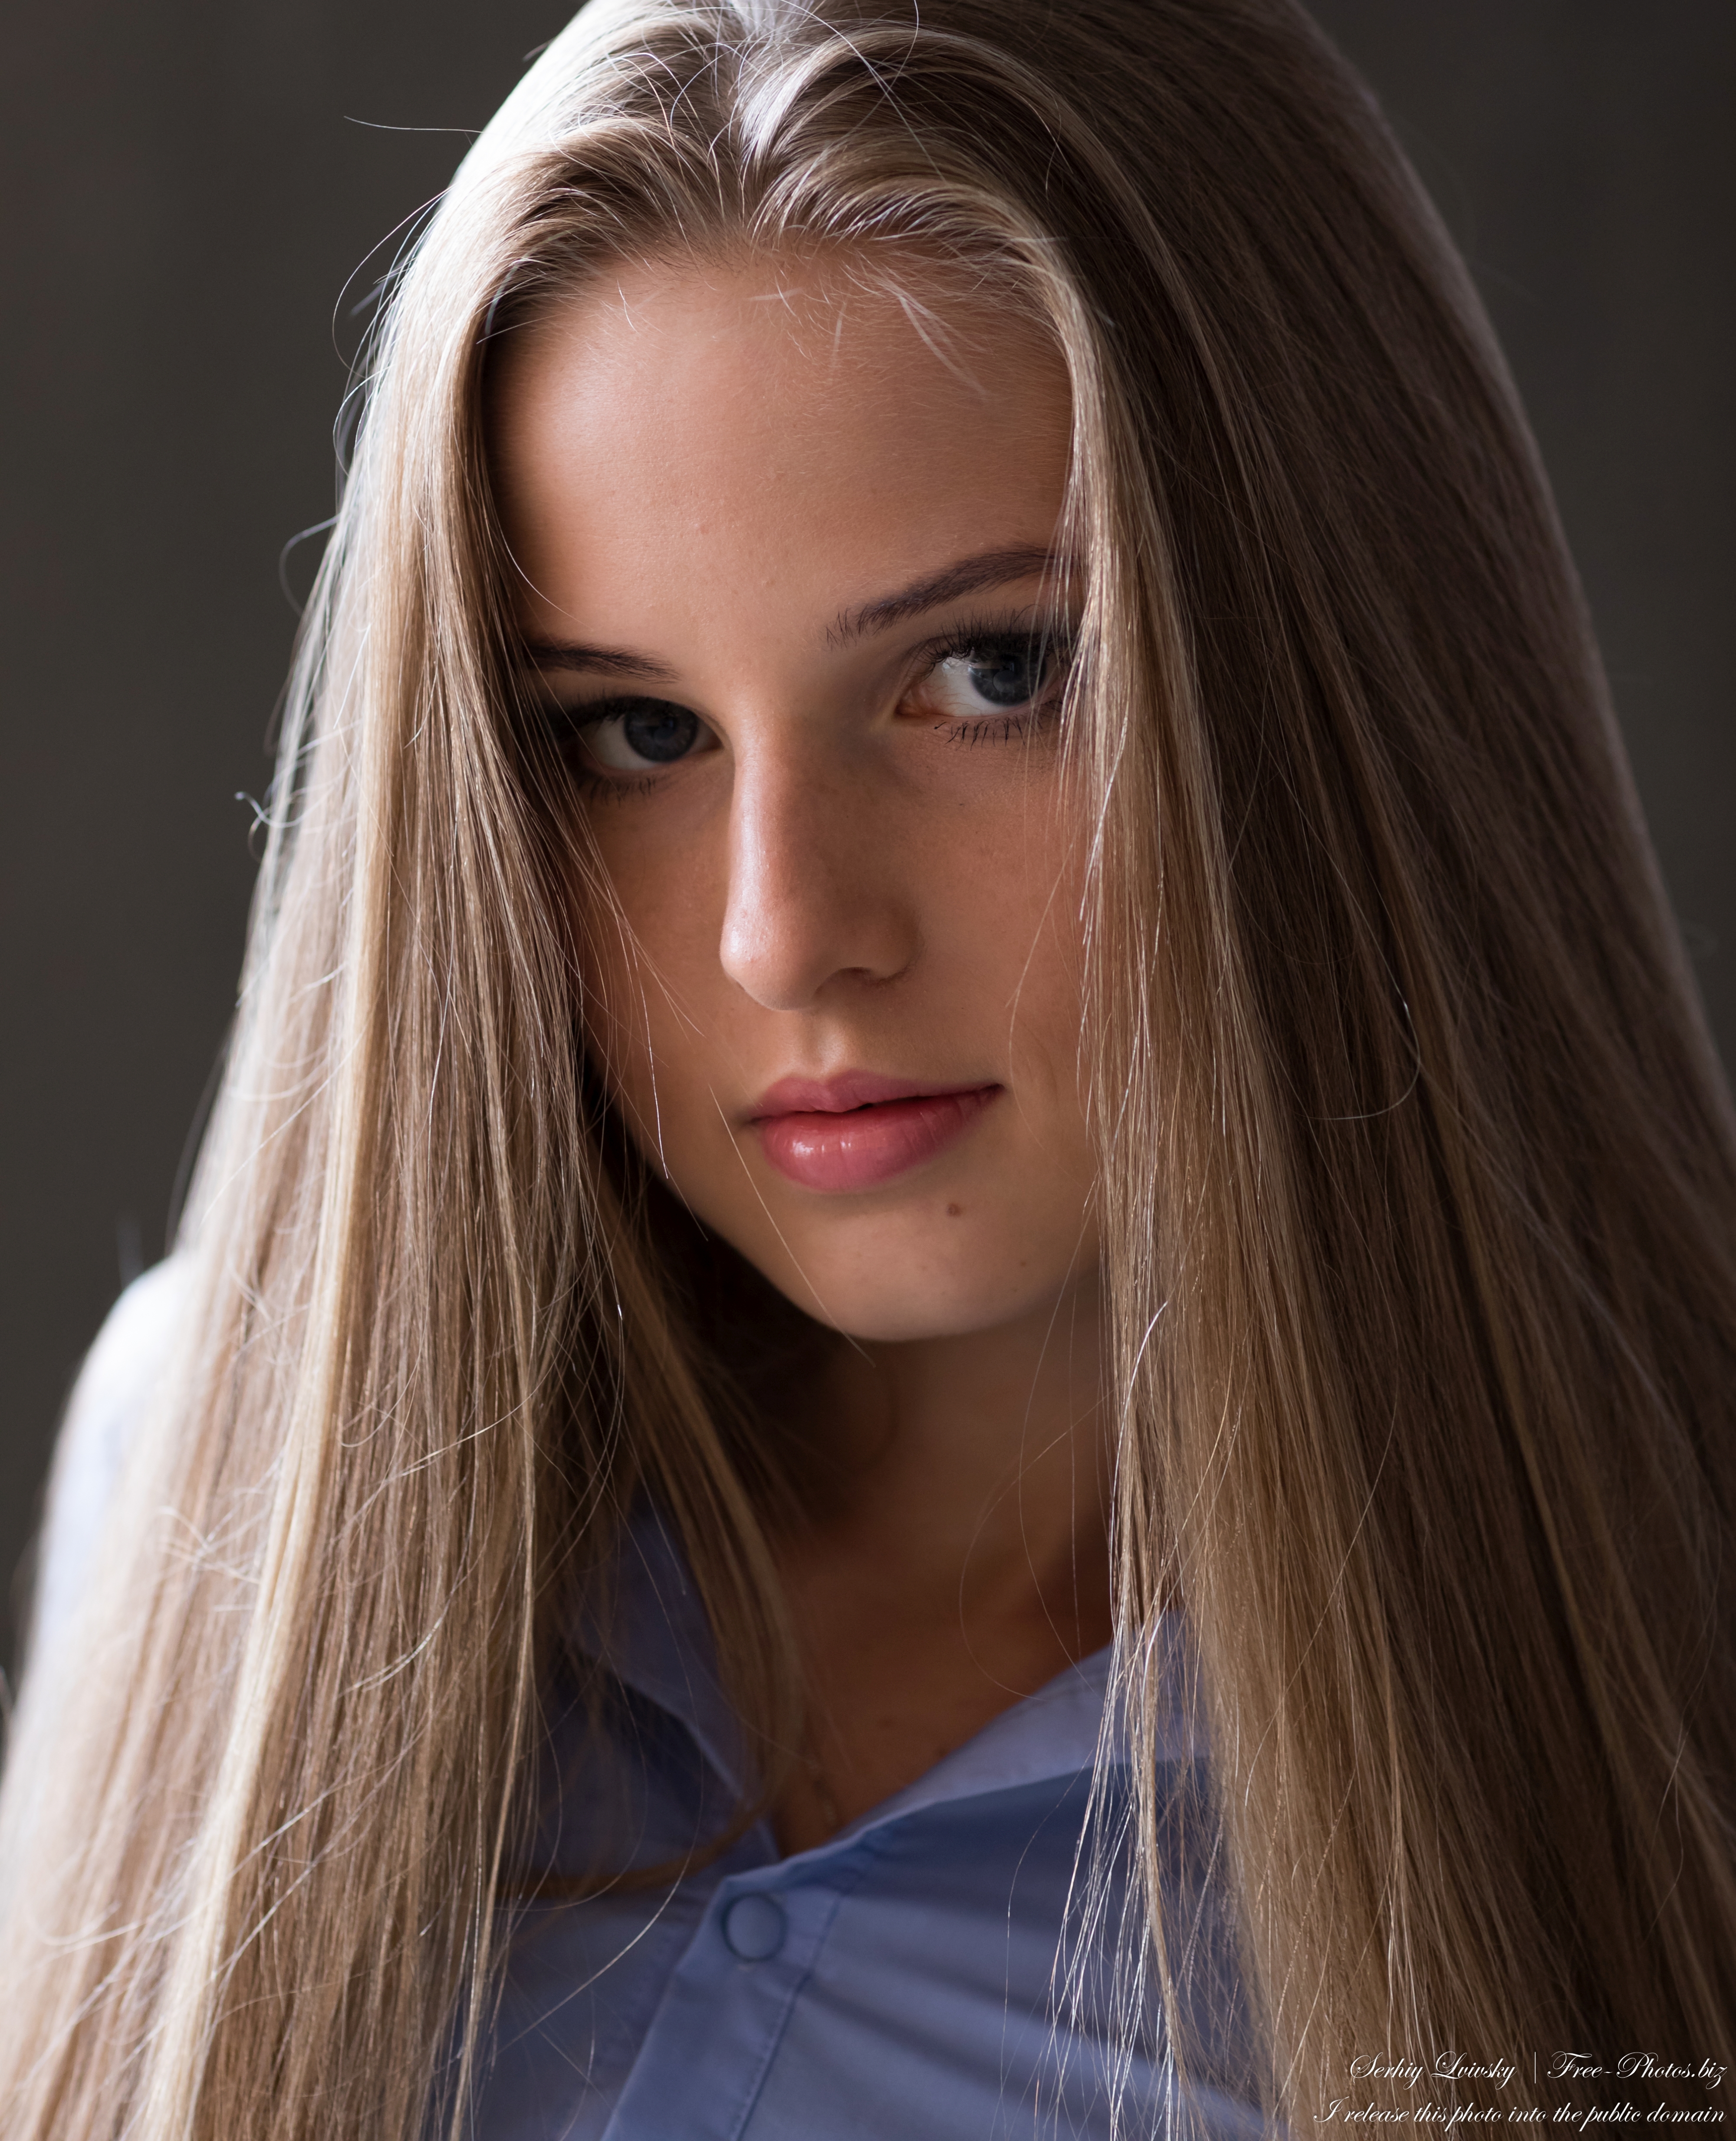 diana_an_18-year-old_natural_blonde_girl_photographed_by_serhiy_lvivsky_in_aug_2020_22